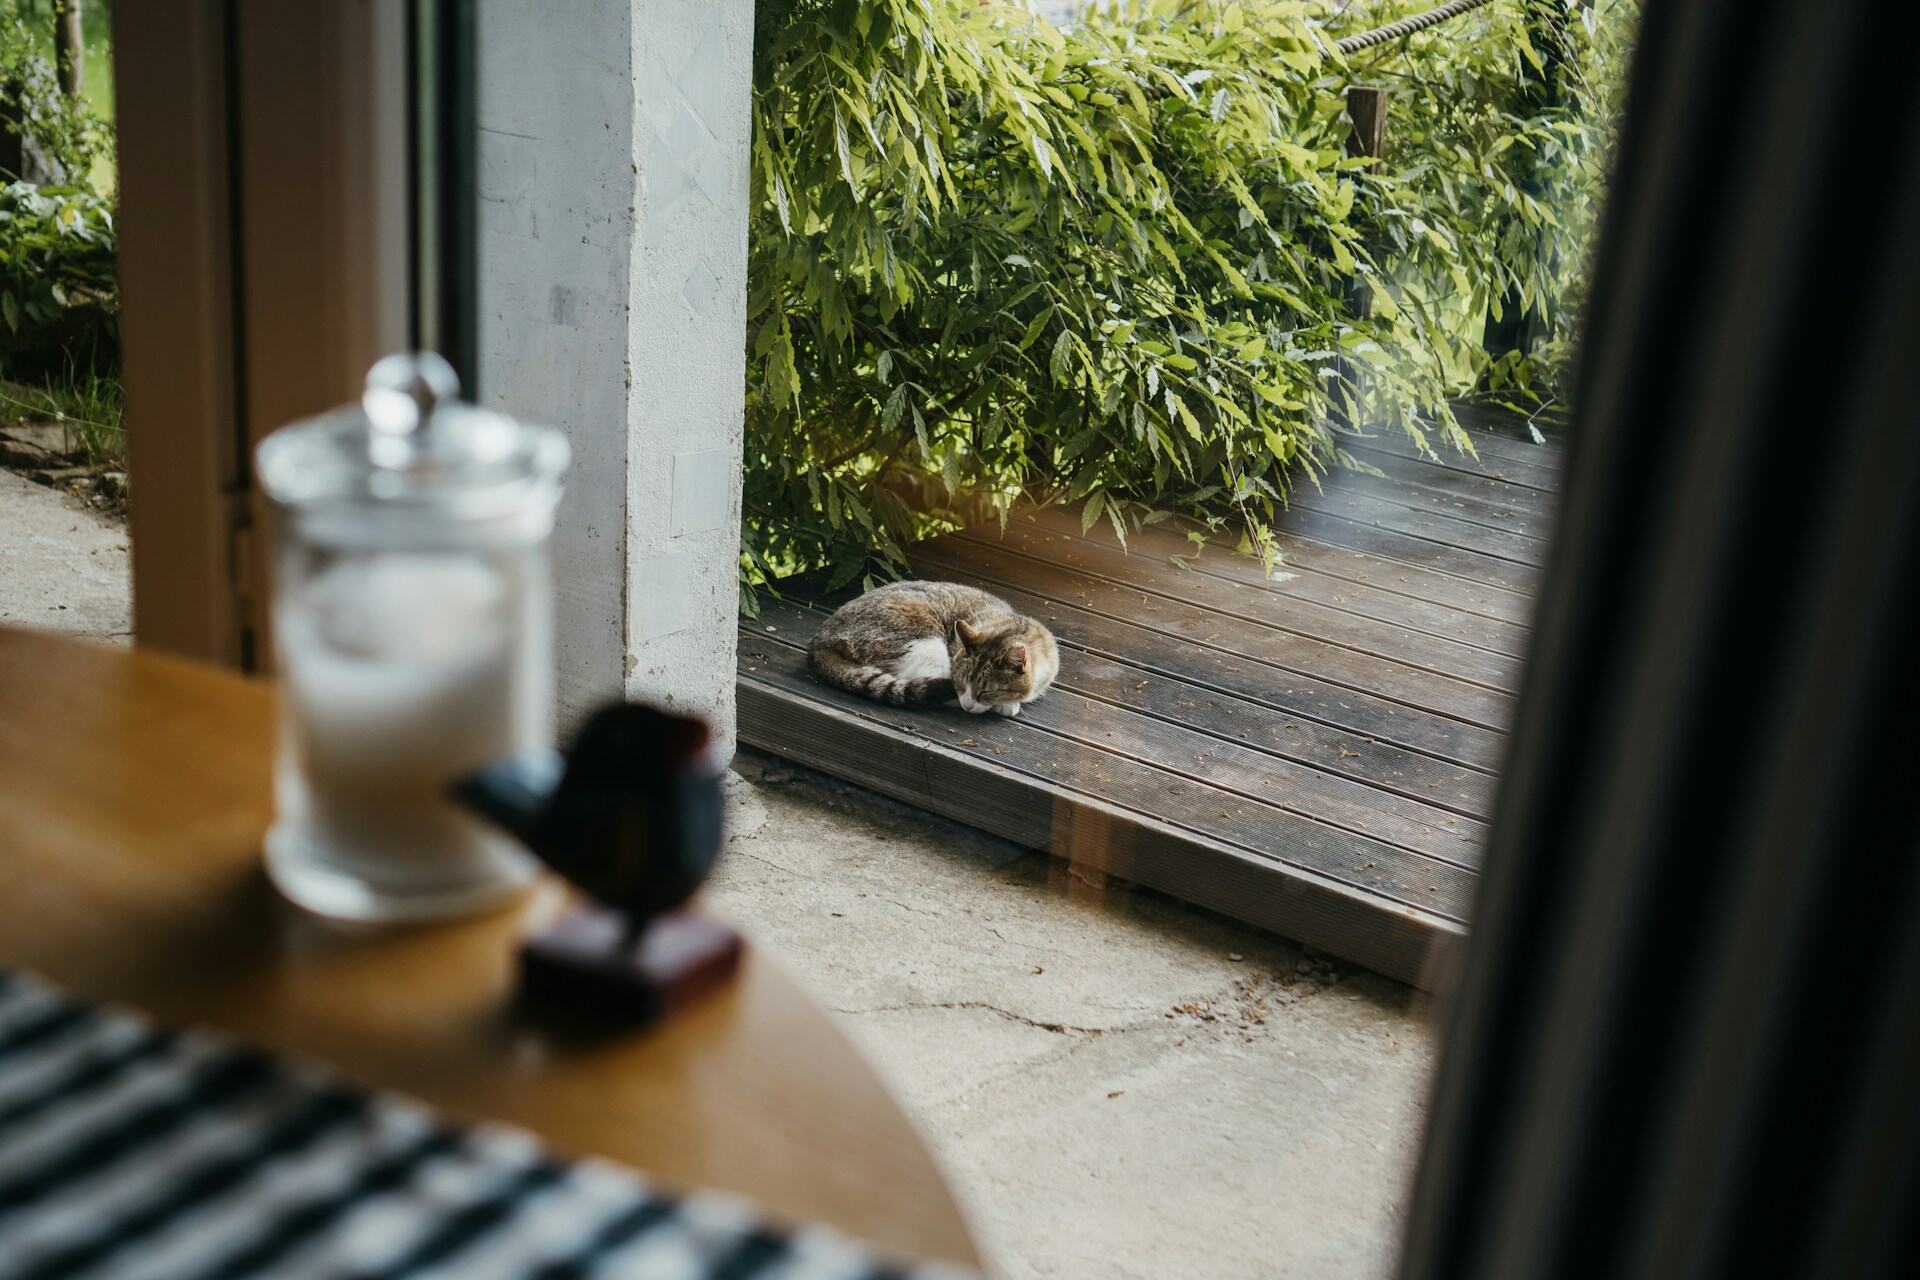 A cat sleeping outdoors on a wooden lawn deck